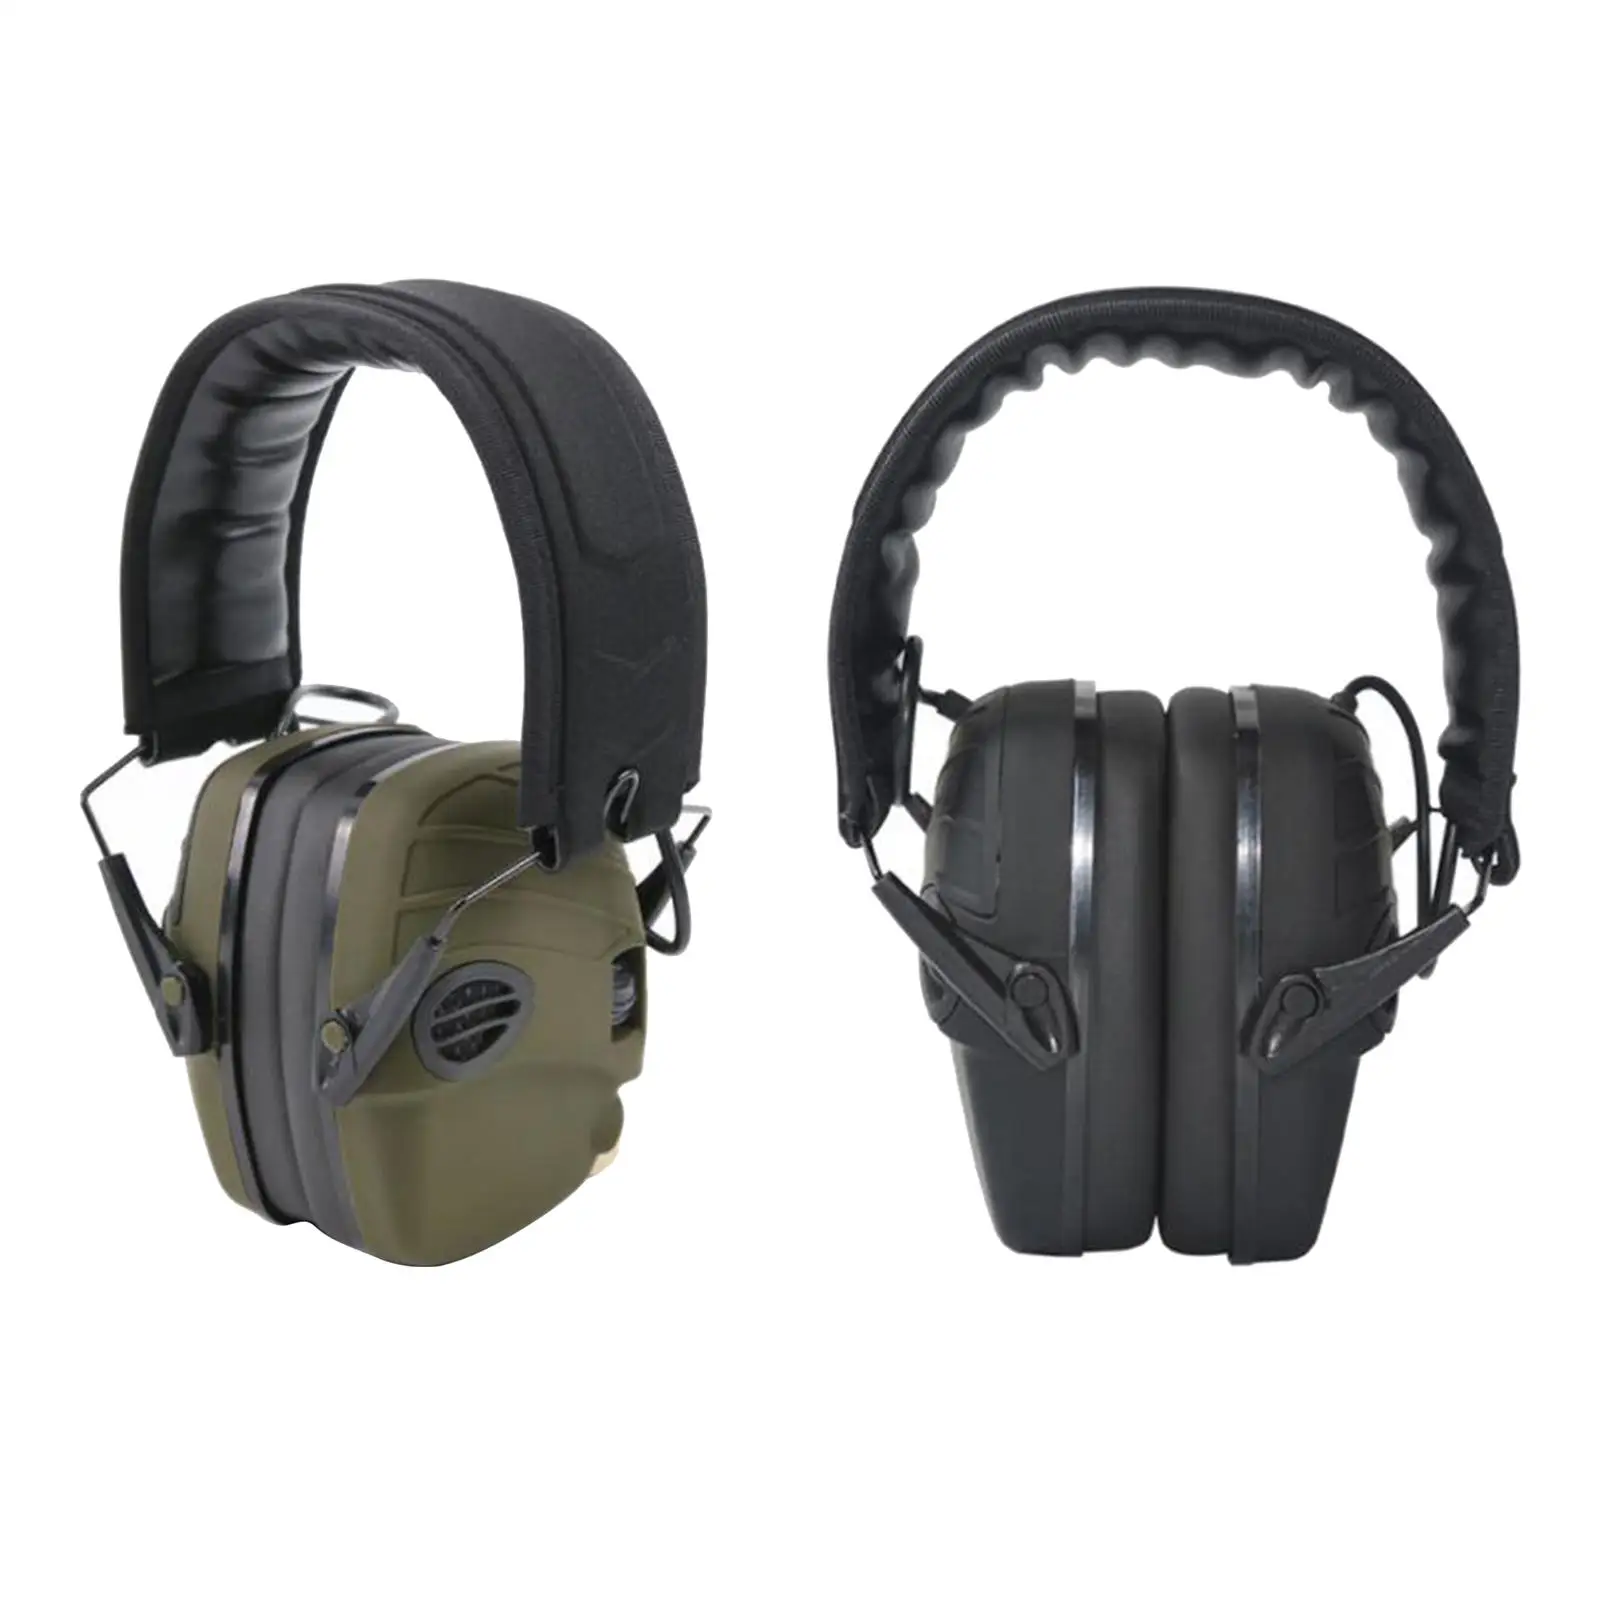 Shooting Safety Earmuffs Ear Protection Hearing Protection Foldable for Gun Range Noise Reduction Compact Headphones